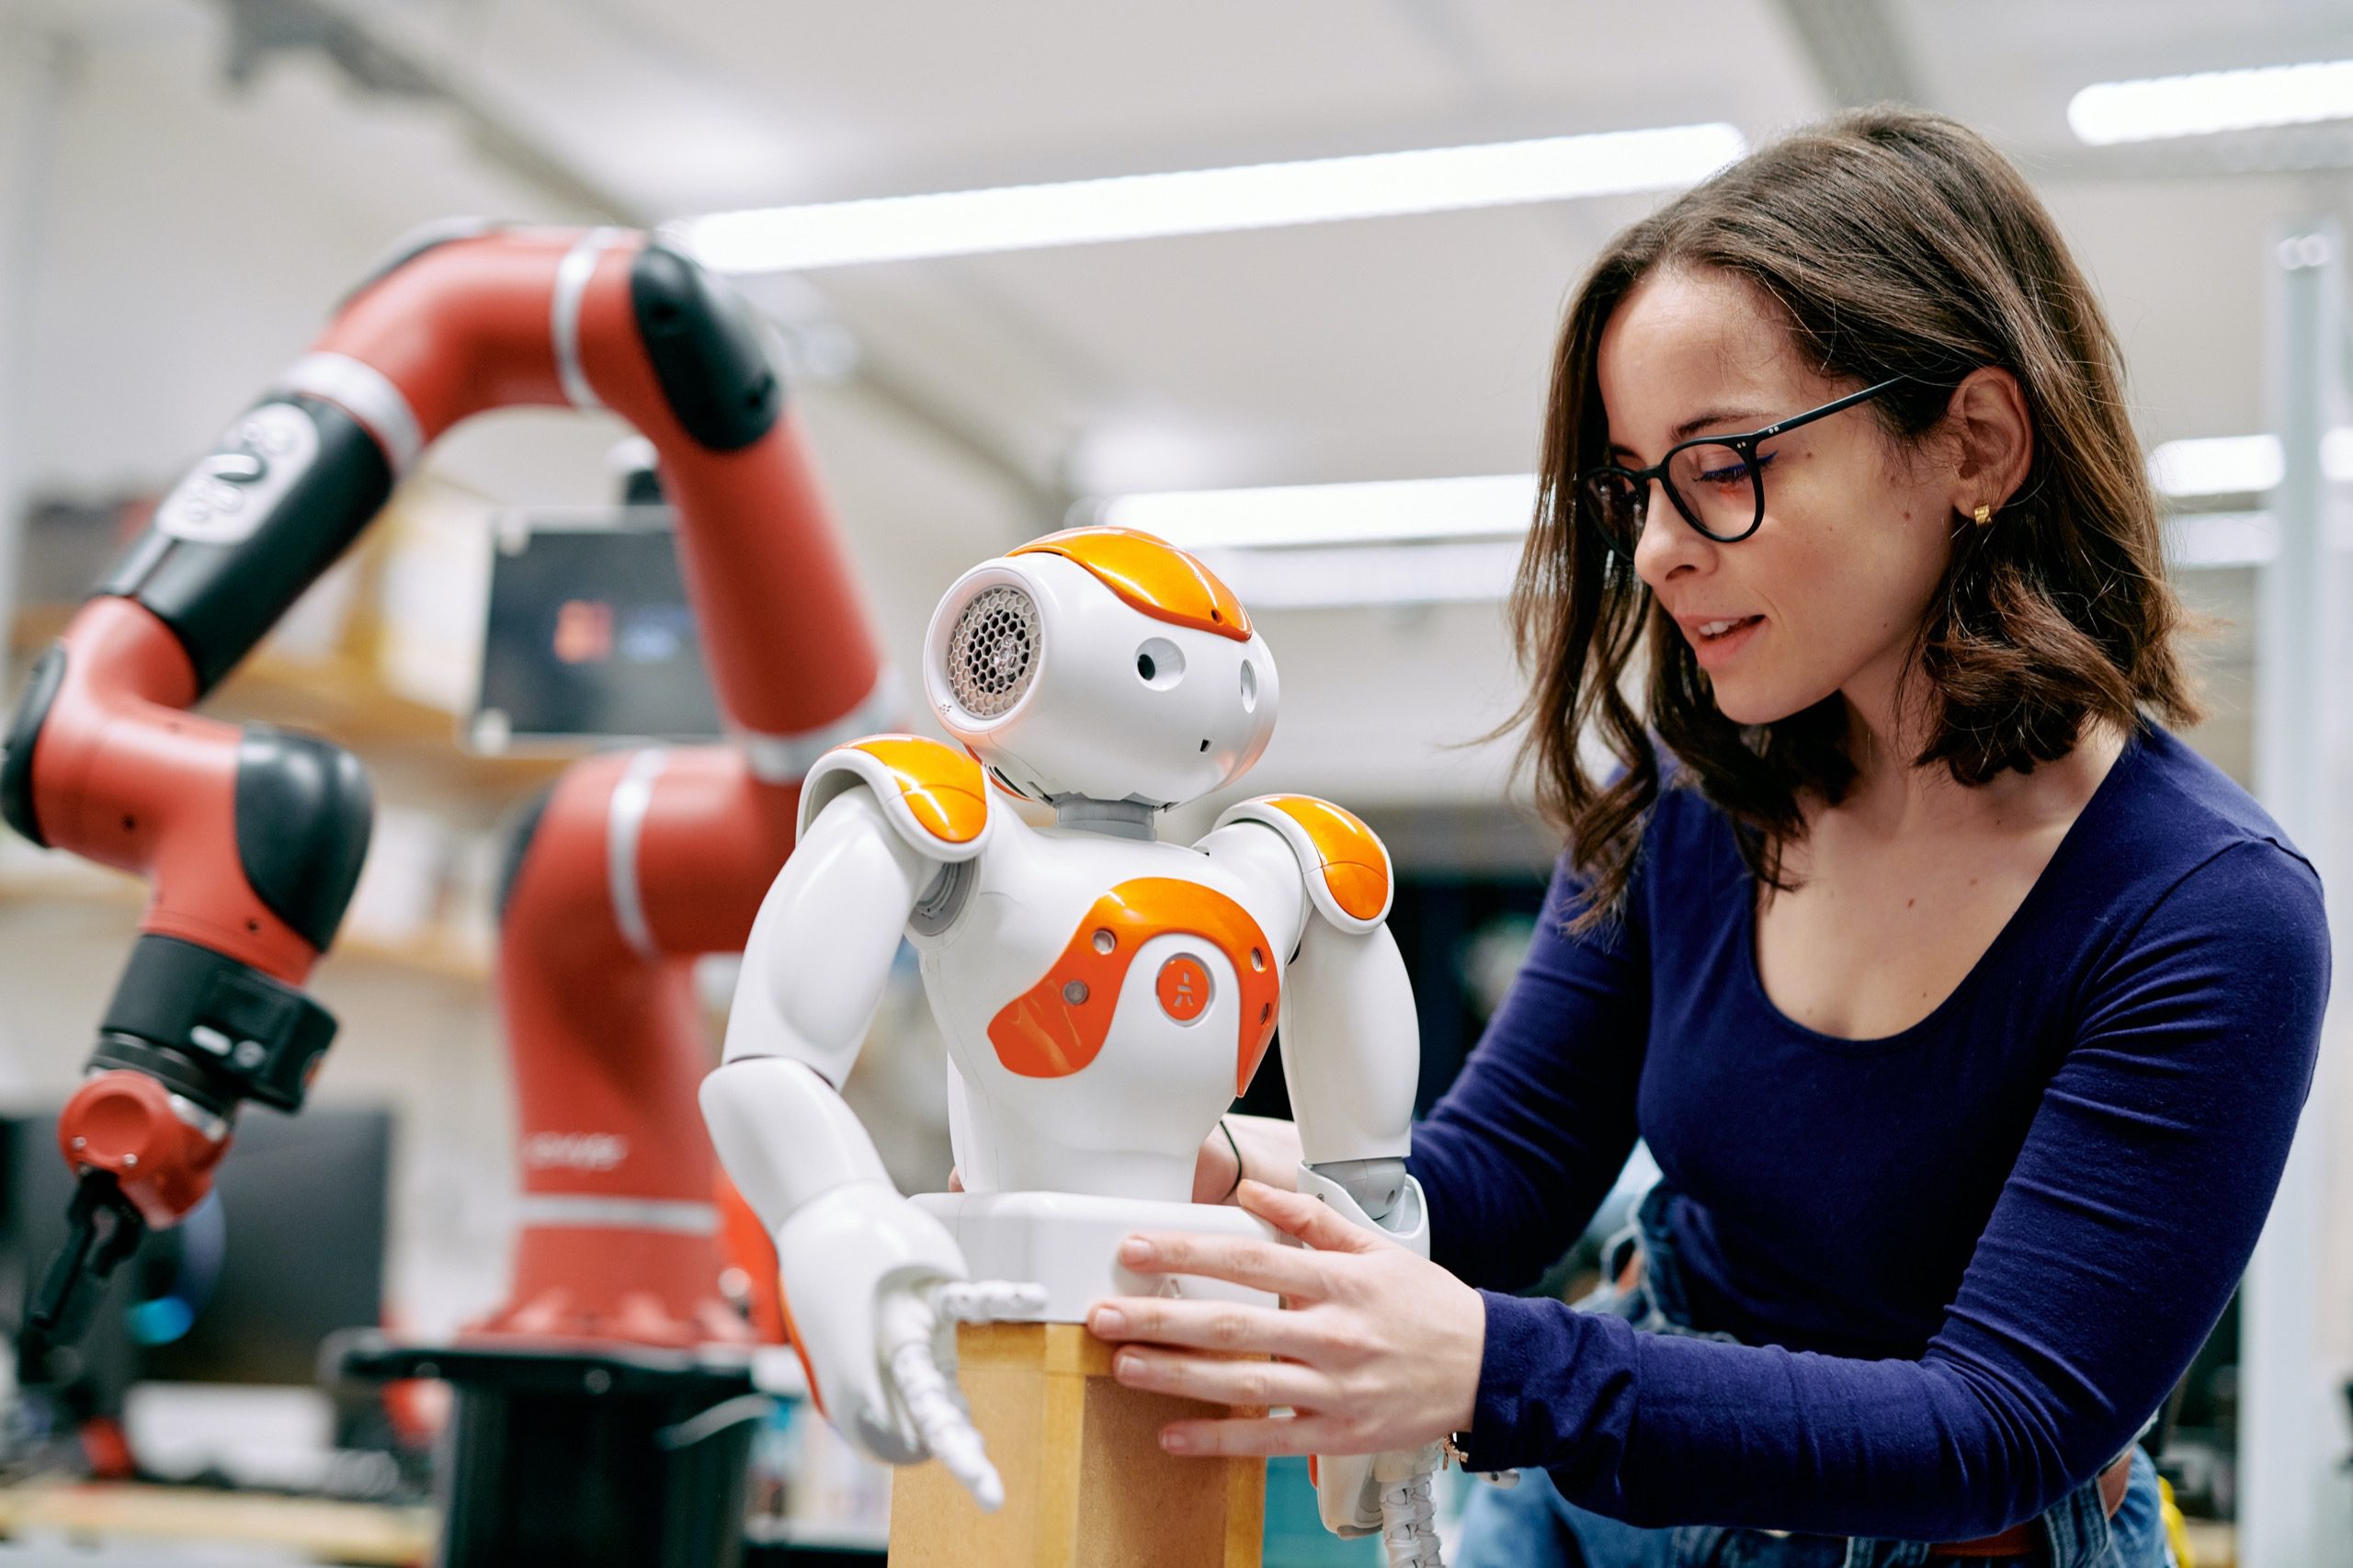 A woman placing a small robot onto a platform. The robot only has an upper body and arms and is white with orange accents.